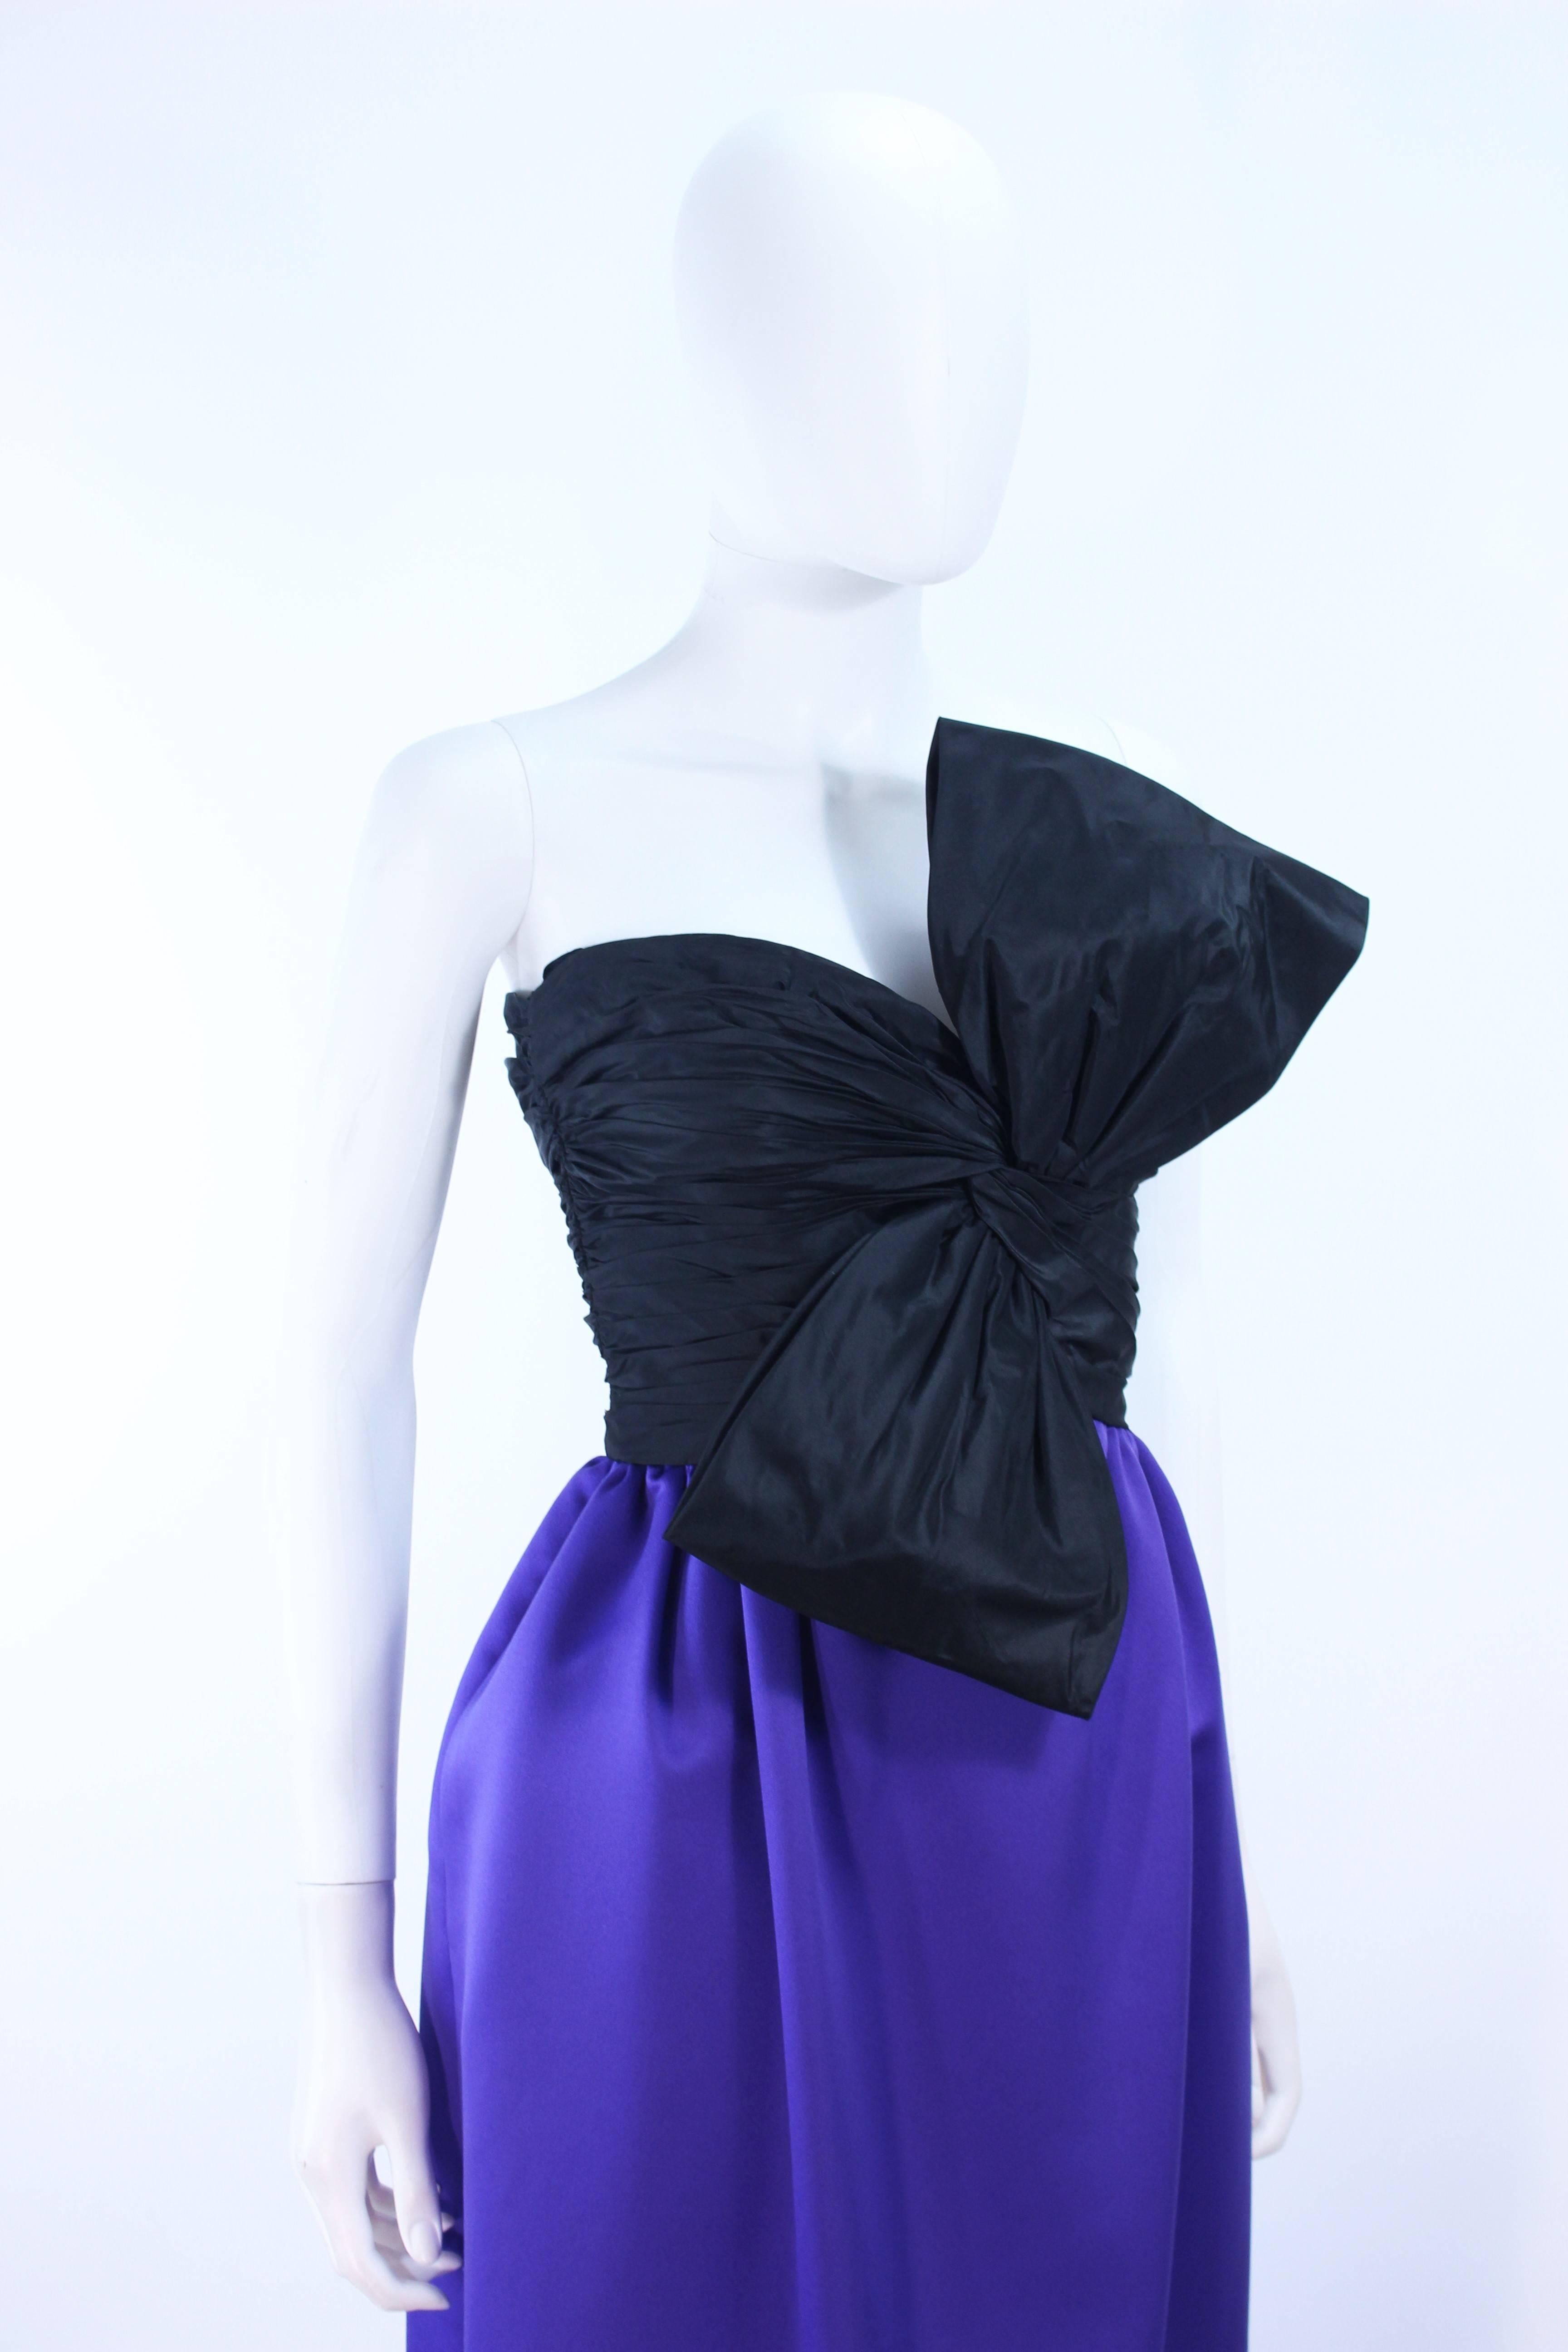 JILL RICHARDS Black and Purple Satin Gown with Bow Applique Size 4 6 2